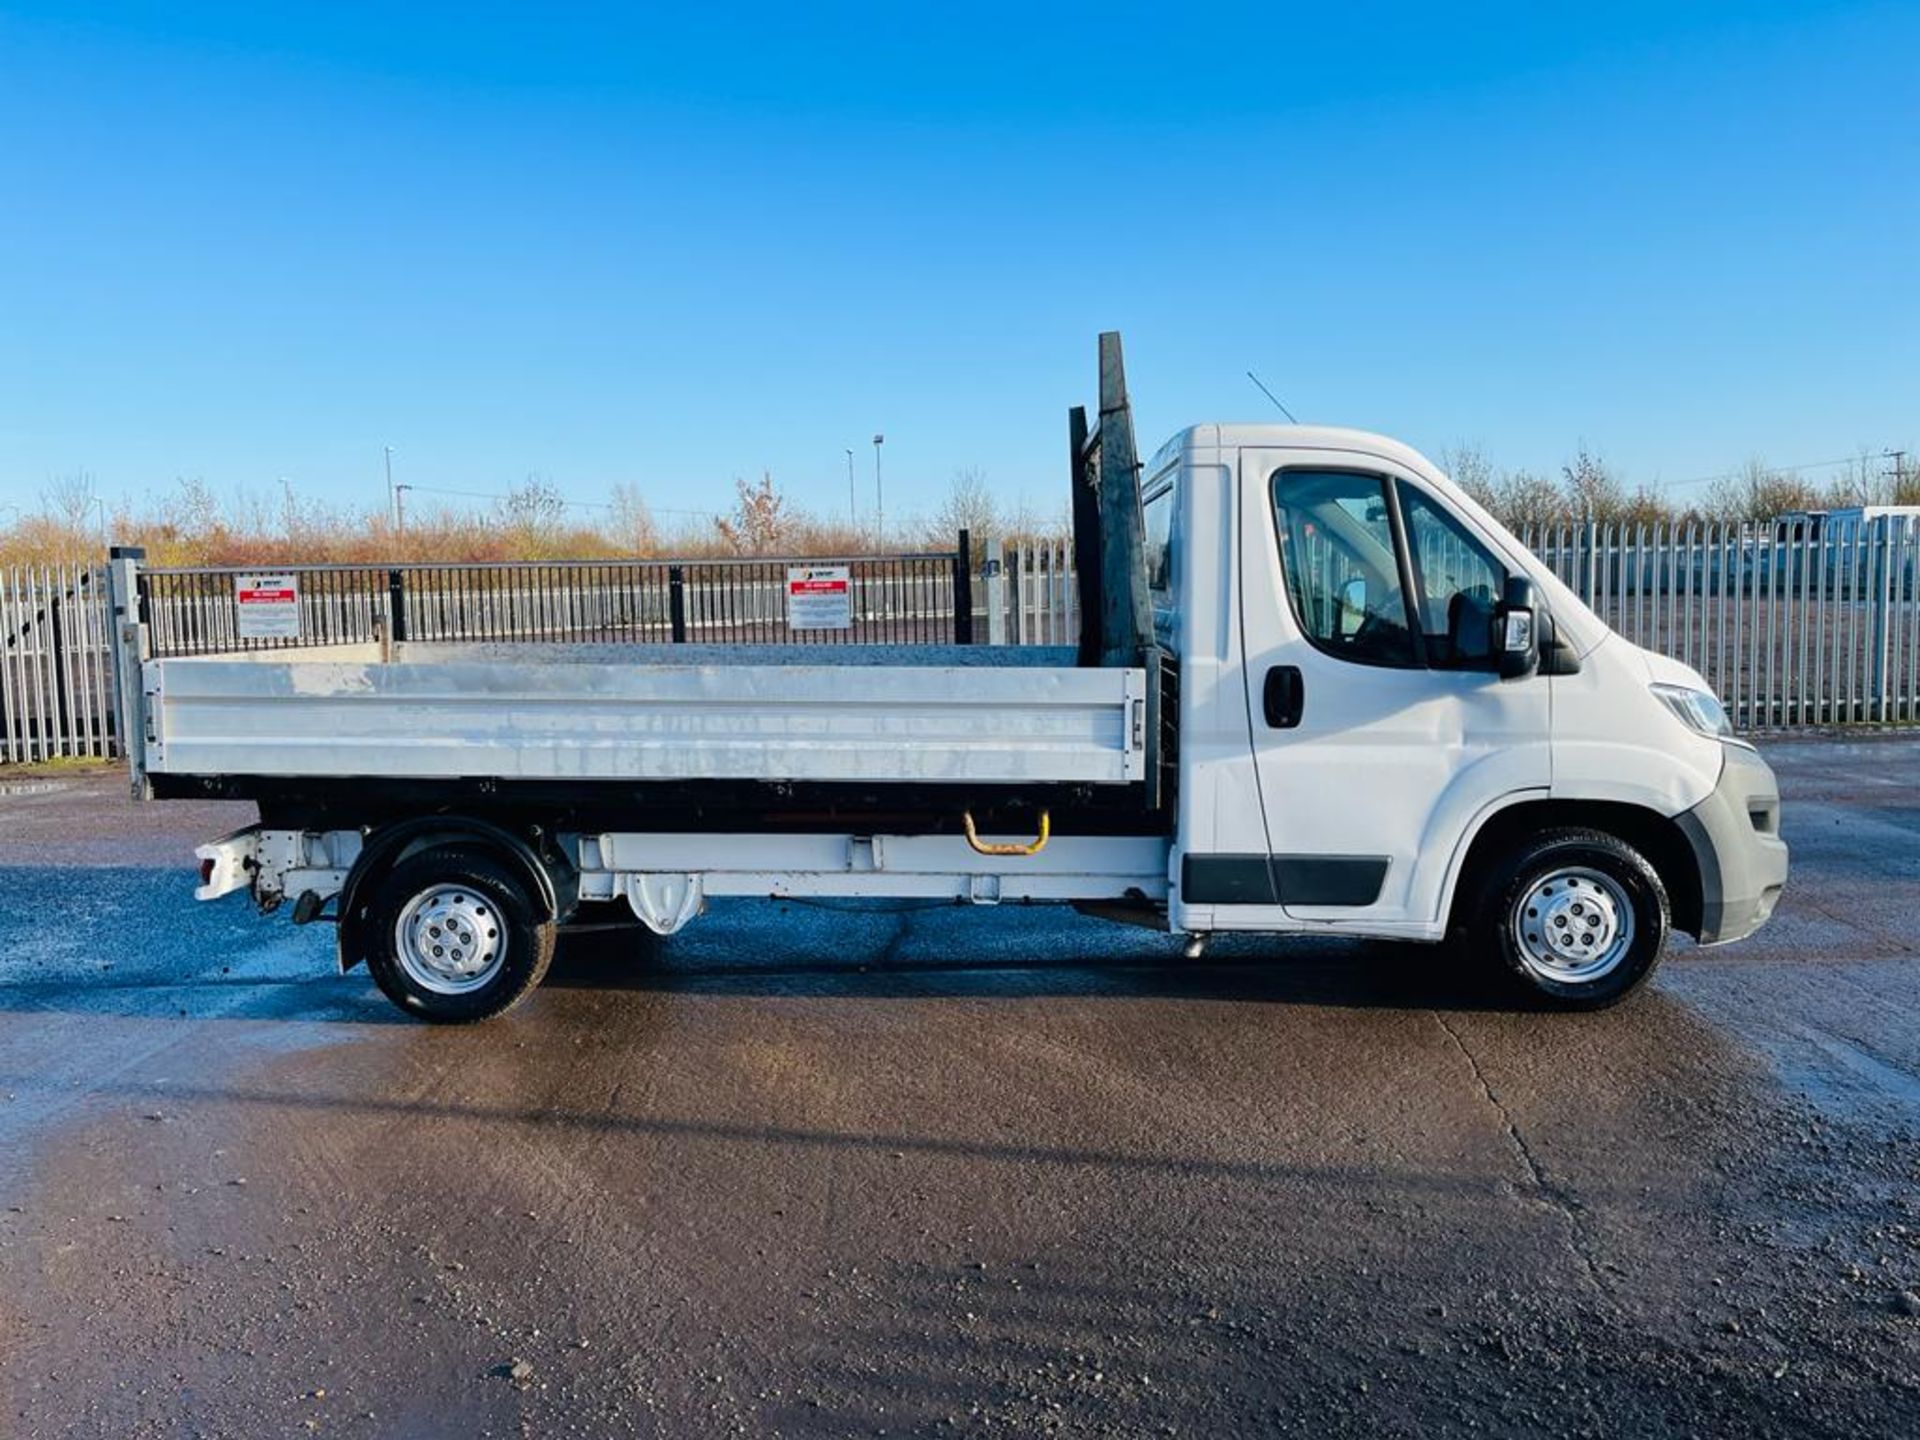 ** ON SALE ** Citroen Relay 35 2.2 HDI 130 LWB Alloy Tipper 2015 '15 Reg' Only 105,090 Miles - Image 16 of 31